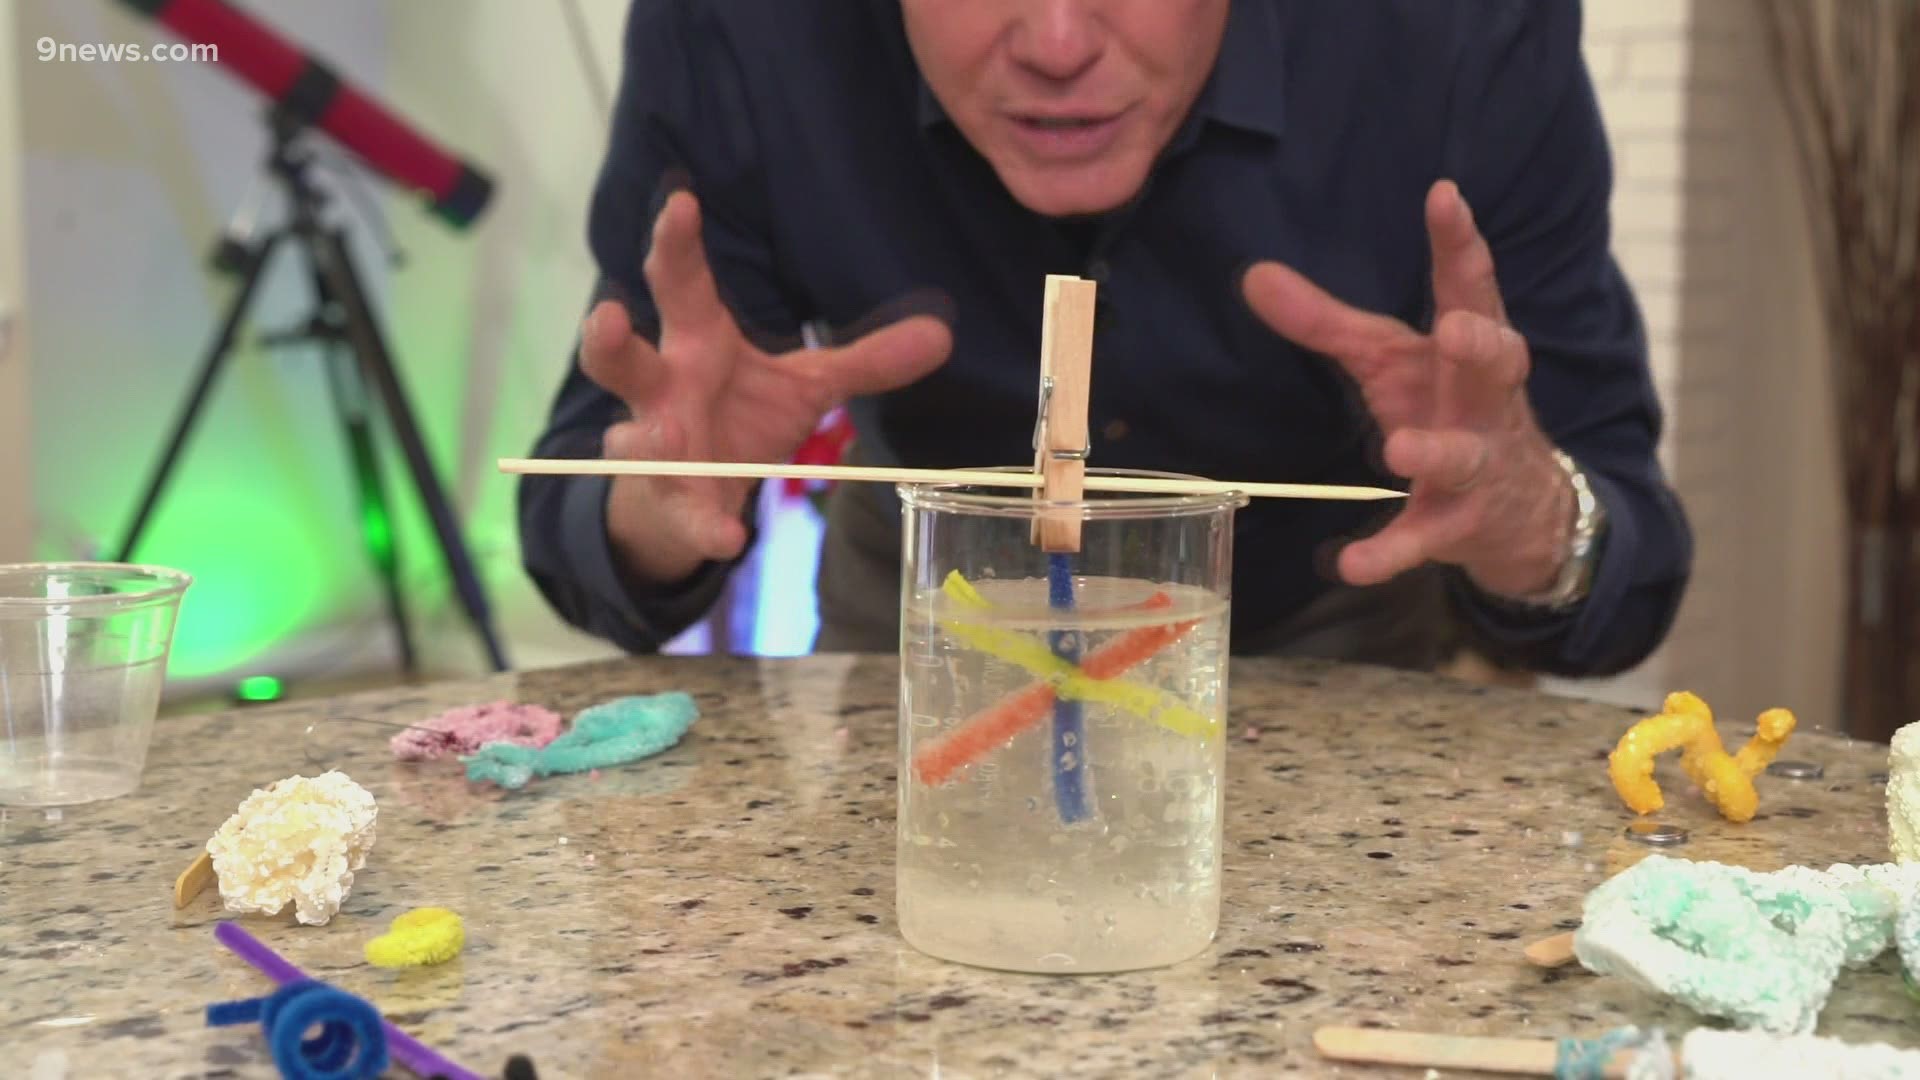 On this science minute, Steve Spangler teaches you how to make an ornament with Borax crystals.